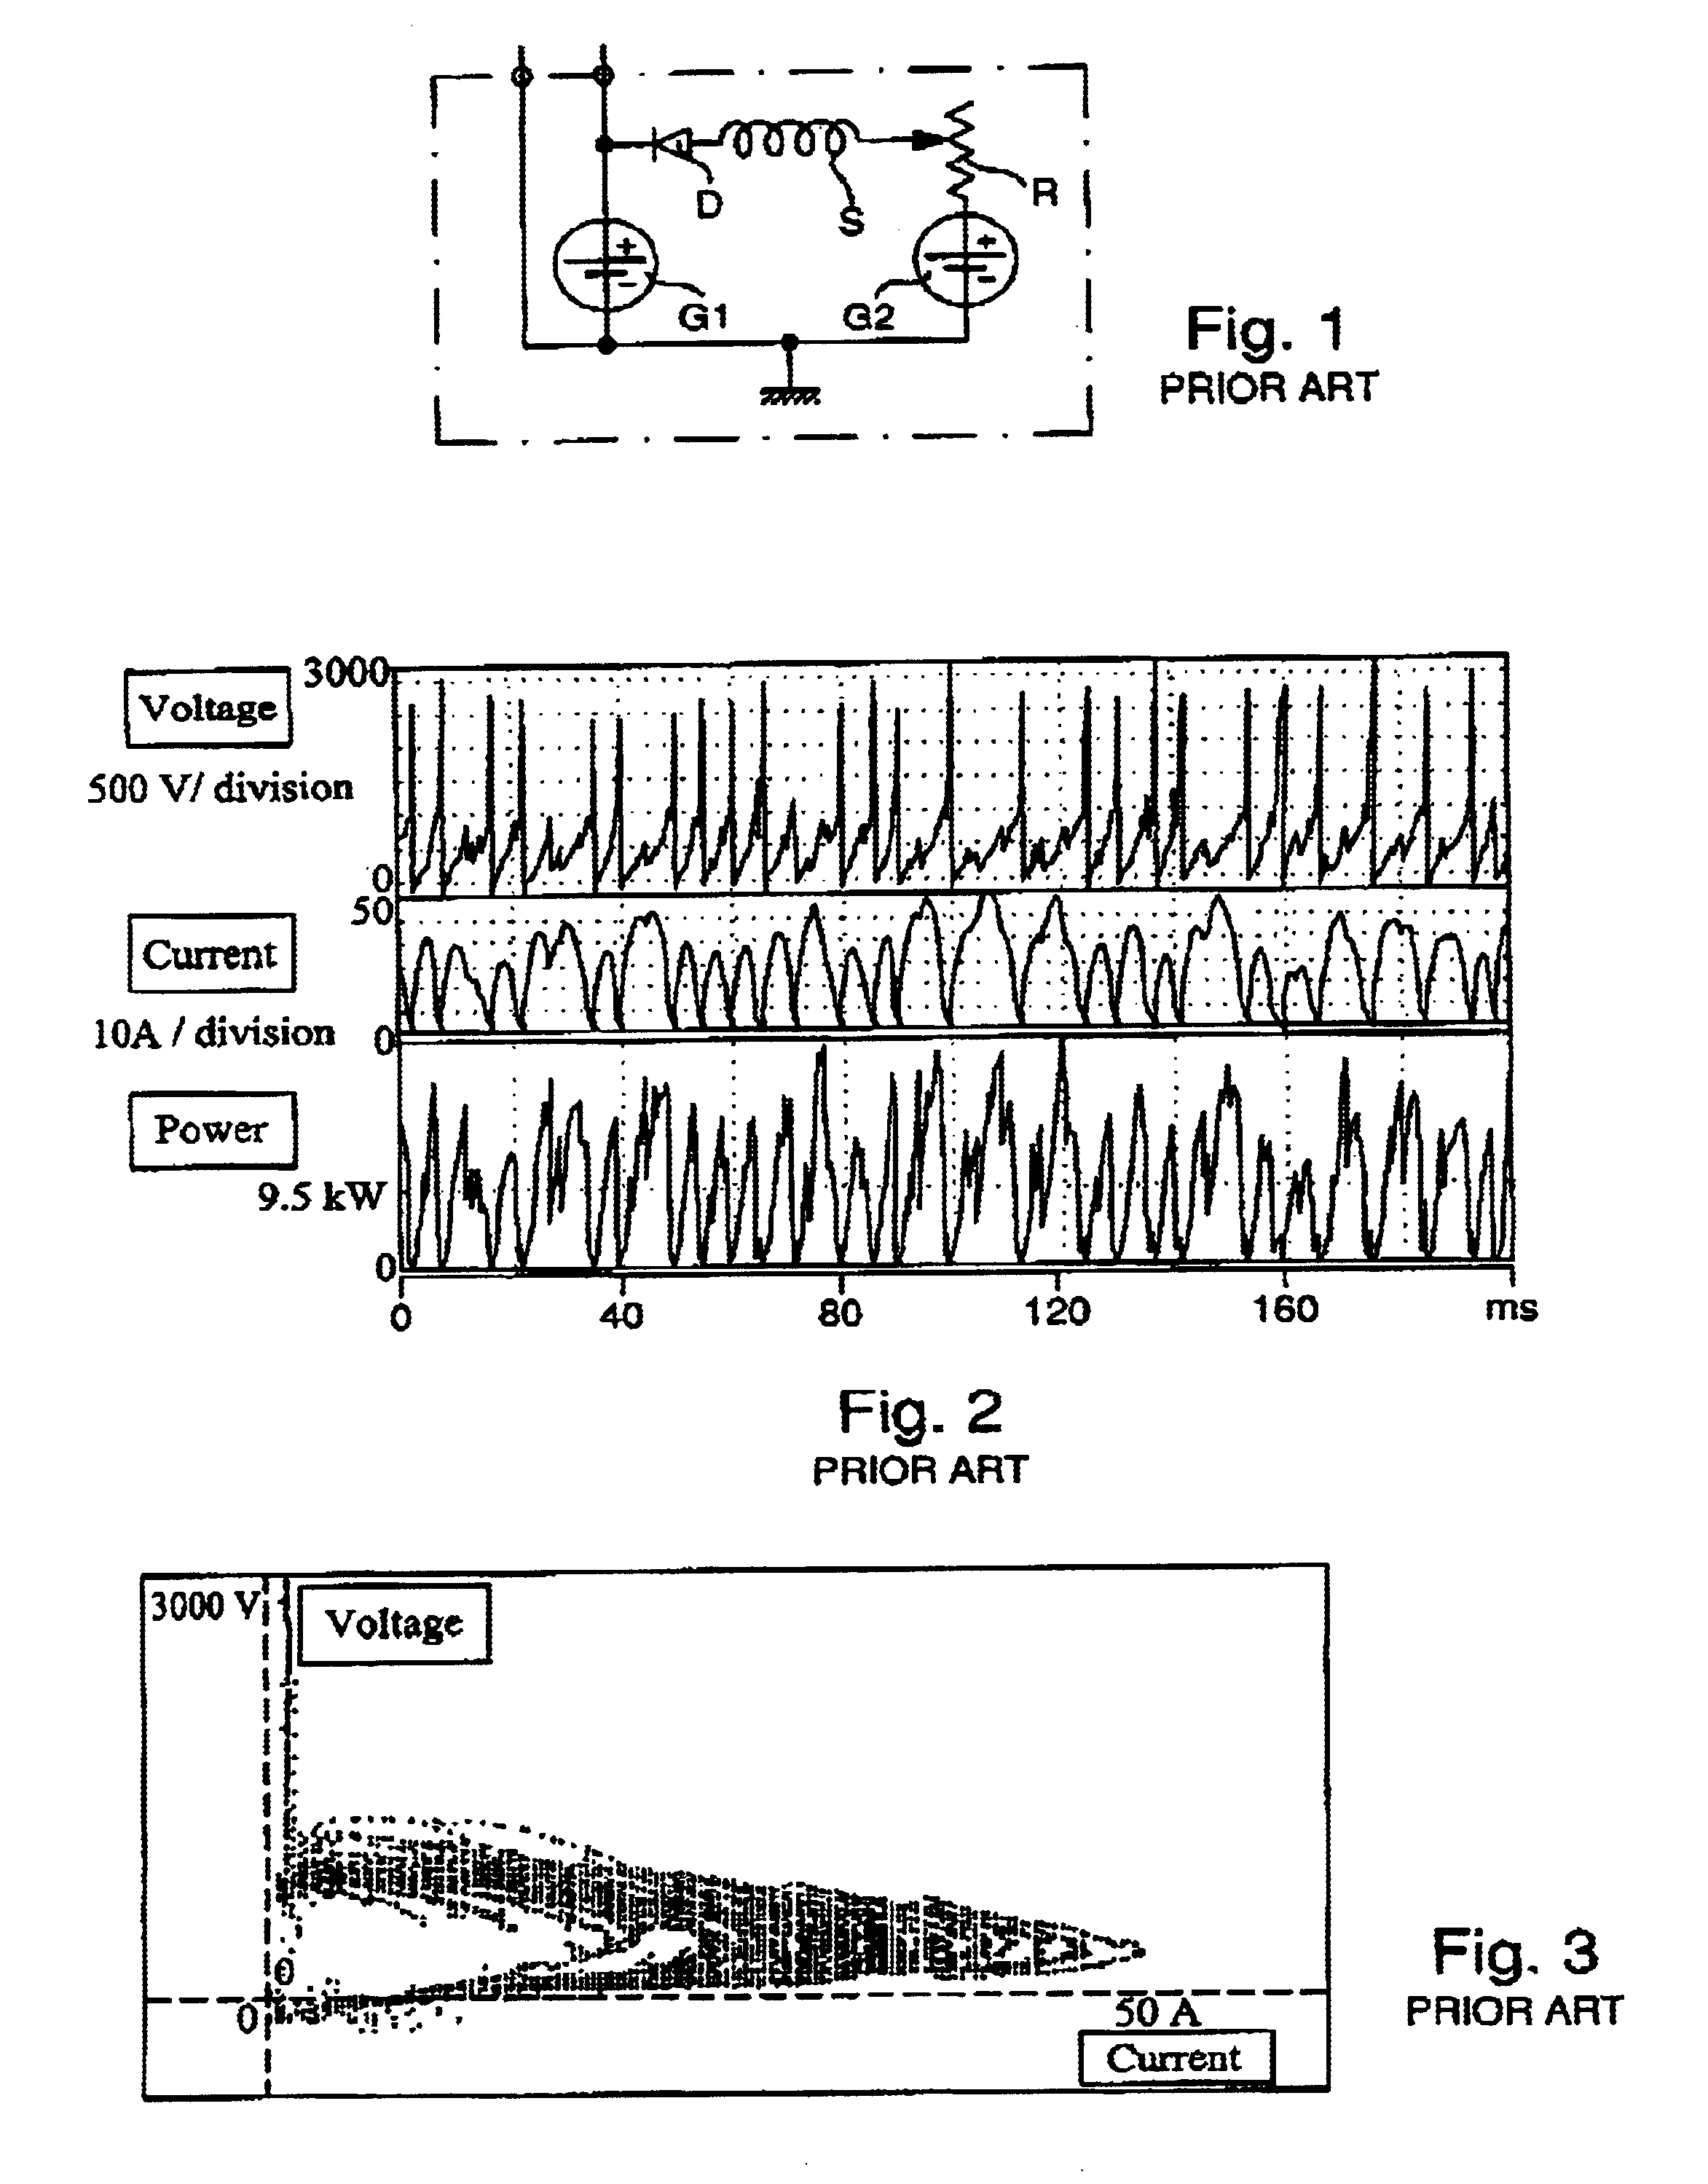 System and method for ignition and reignition of unstable electrical discharges